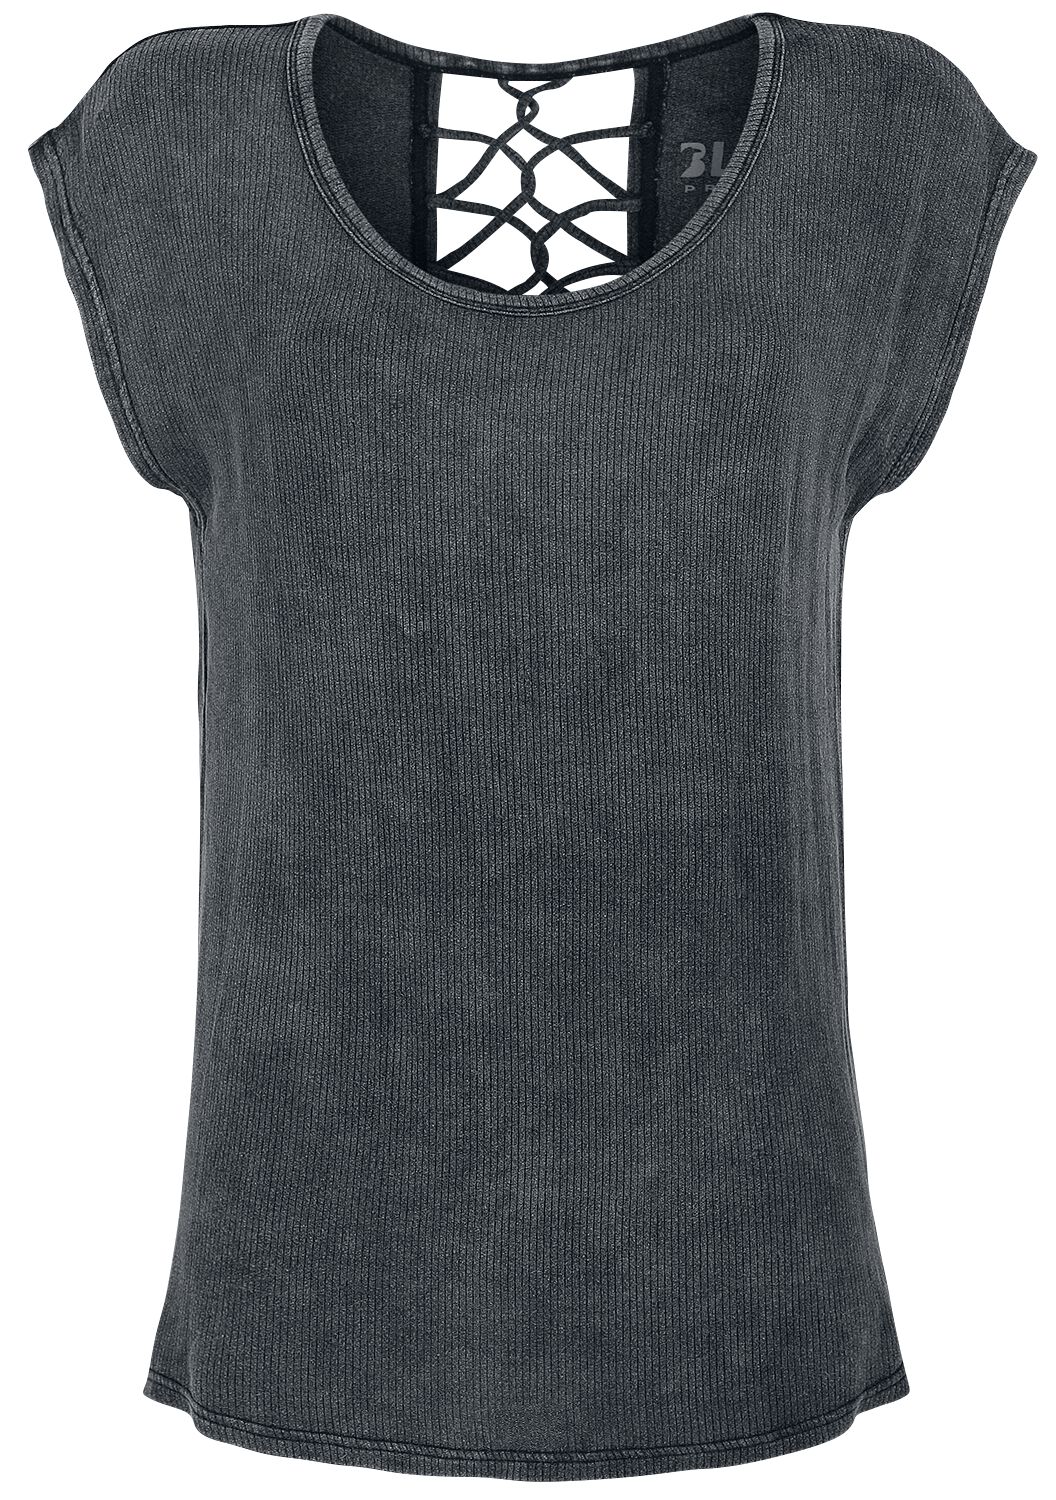 Image of T-Shirt di Black Premium by EMP - T-Shirt with Decorative Bands at the Back - M a XL - Donna - nero